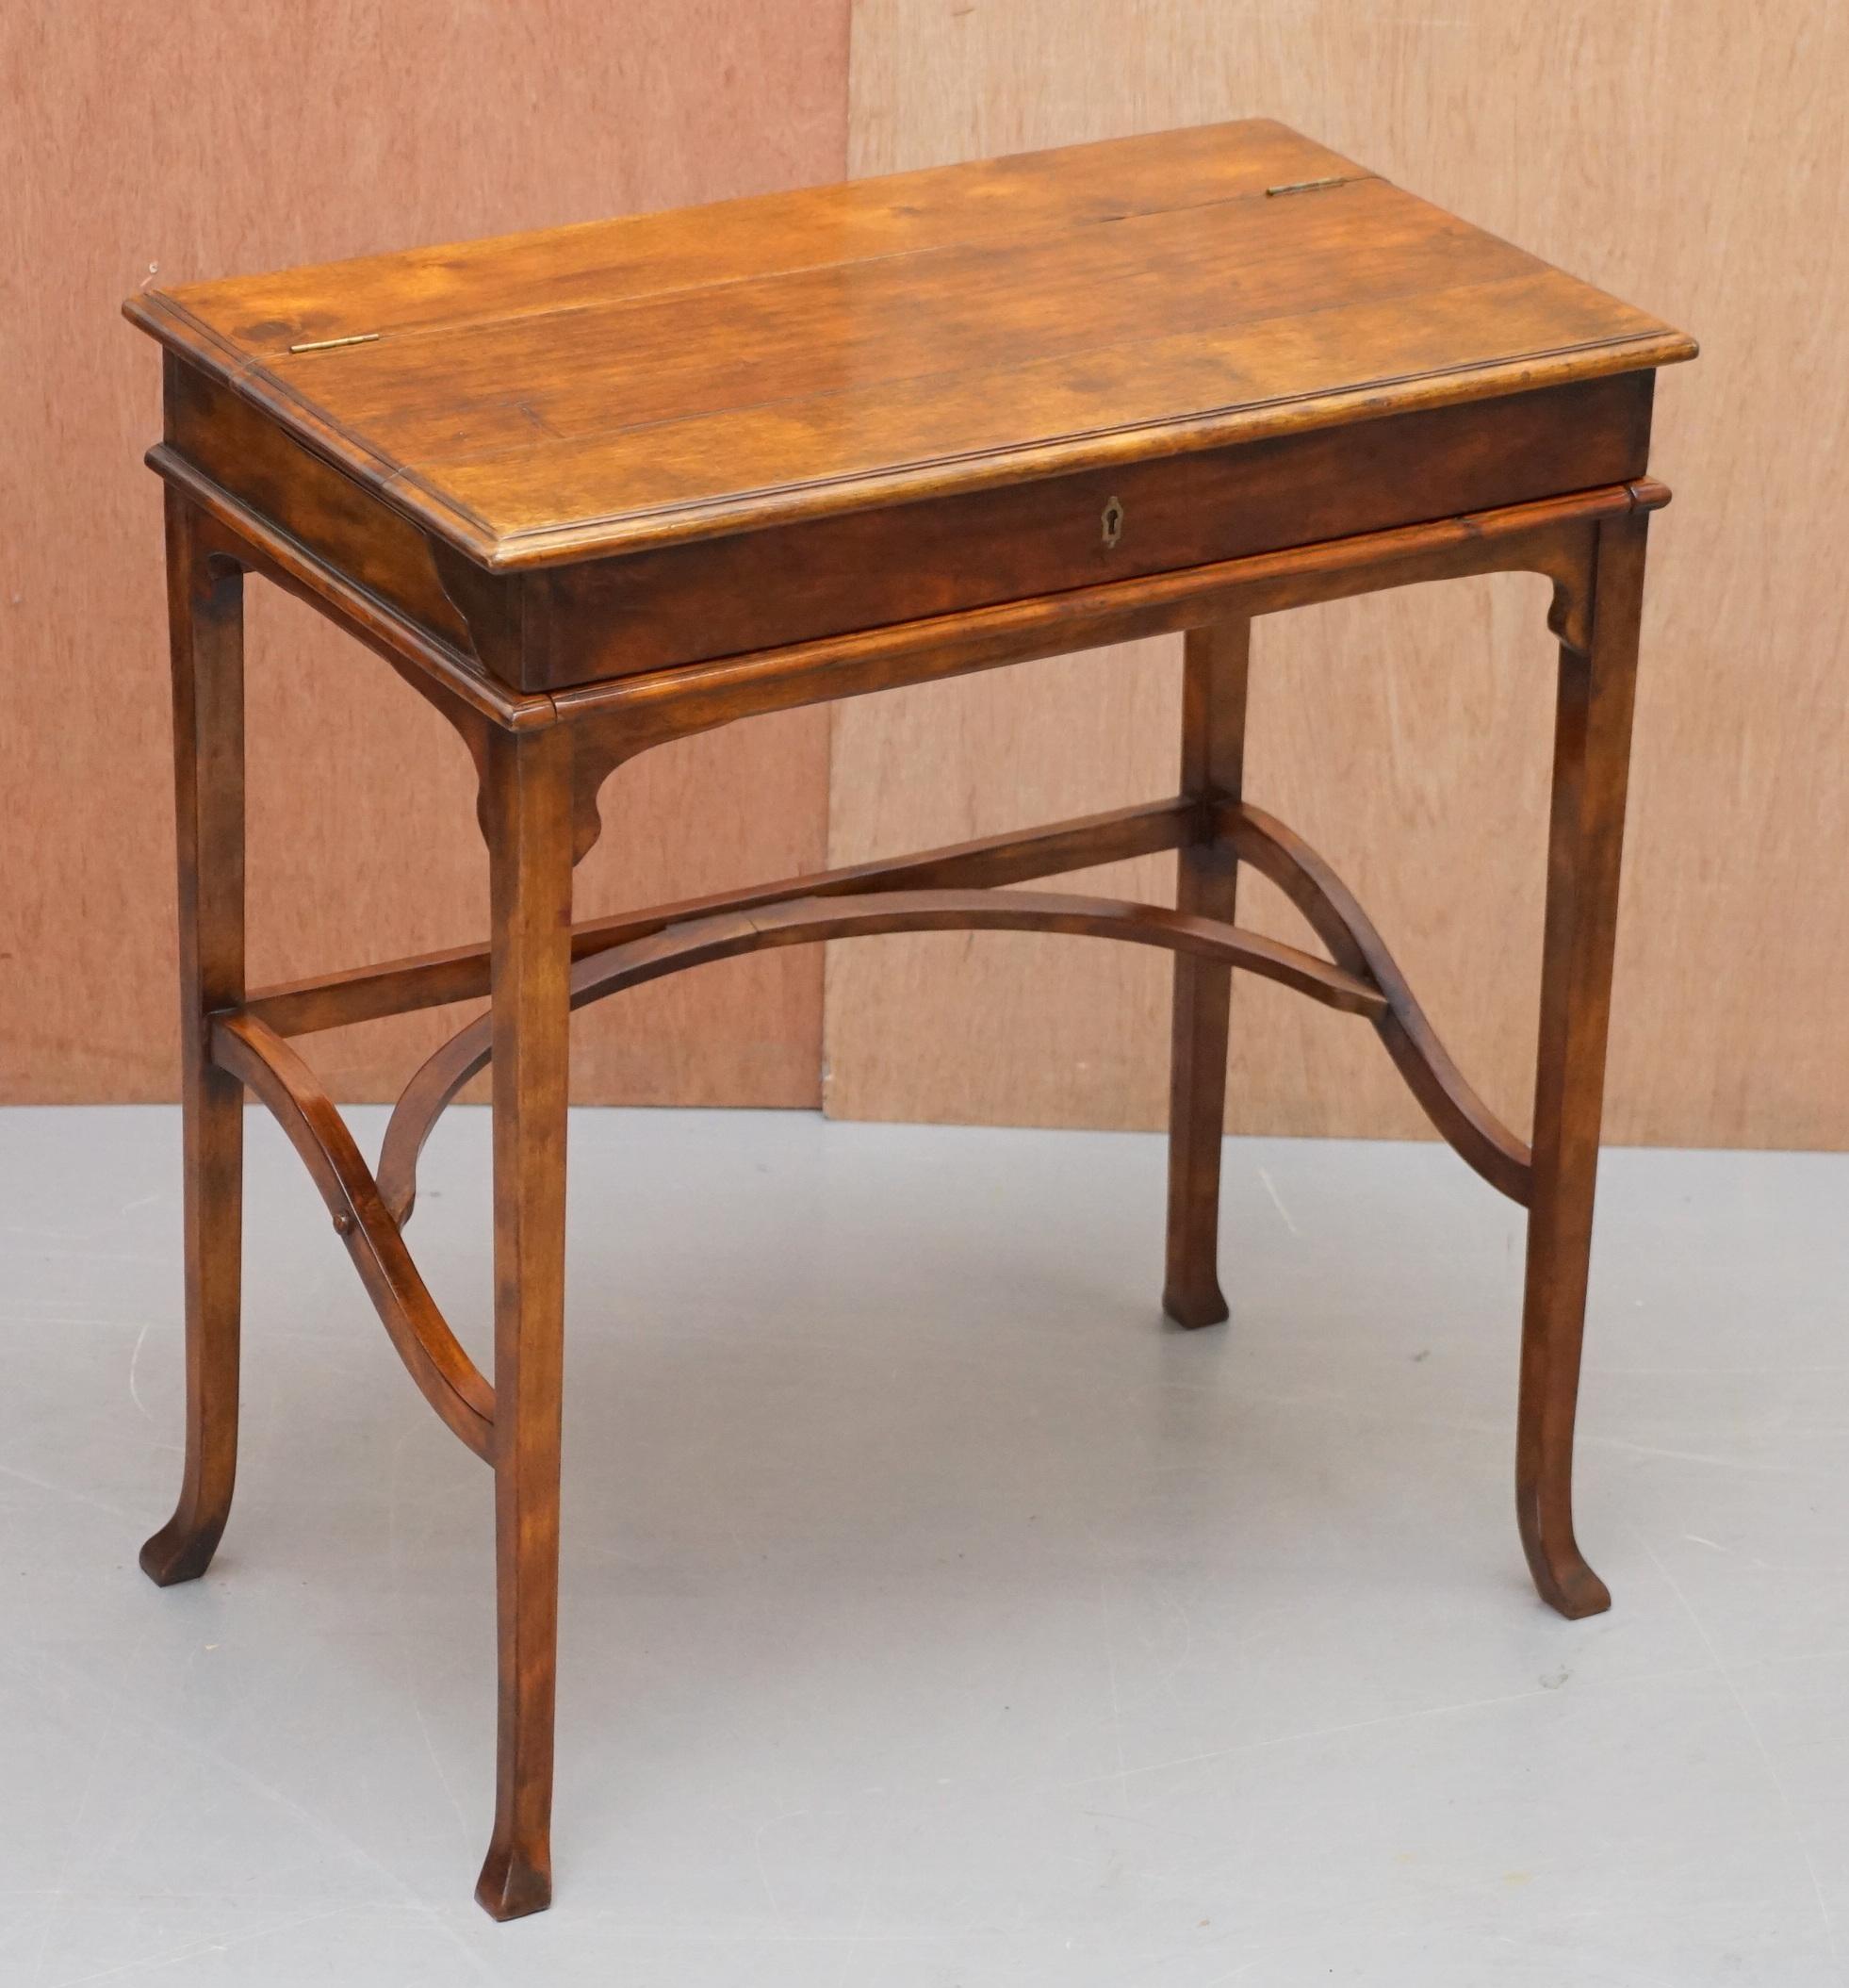 We are delighted to offer for sale this lovely Theodore Alexander Campaign desk with embossed brown leather writing surface

A good looking and well made desk, it can be used as it is or you can open the top to reveal a brown leather work top,